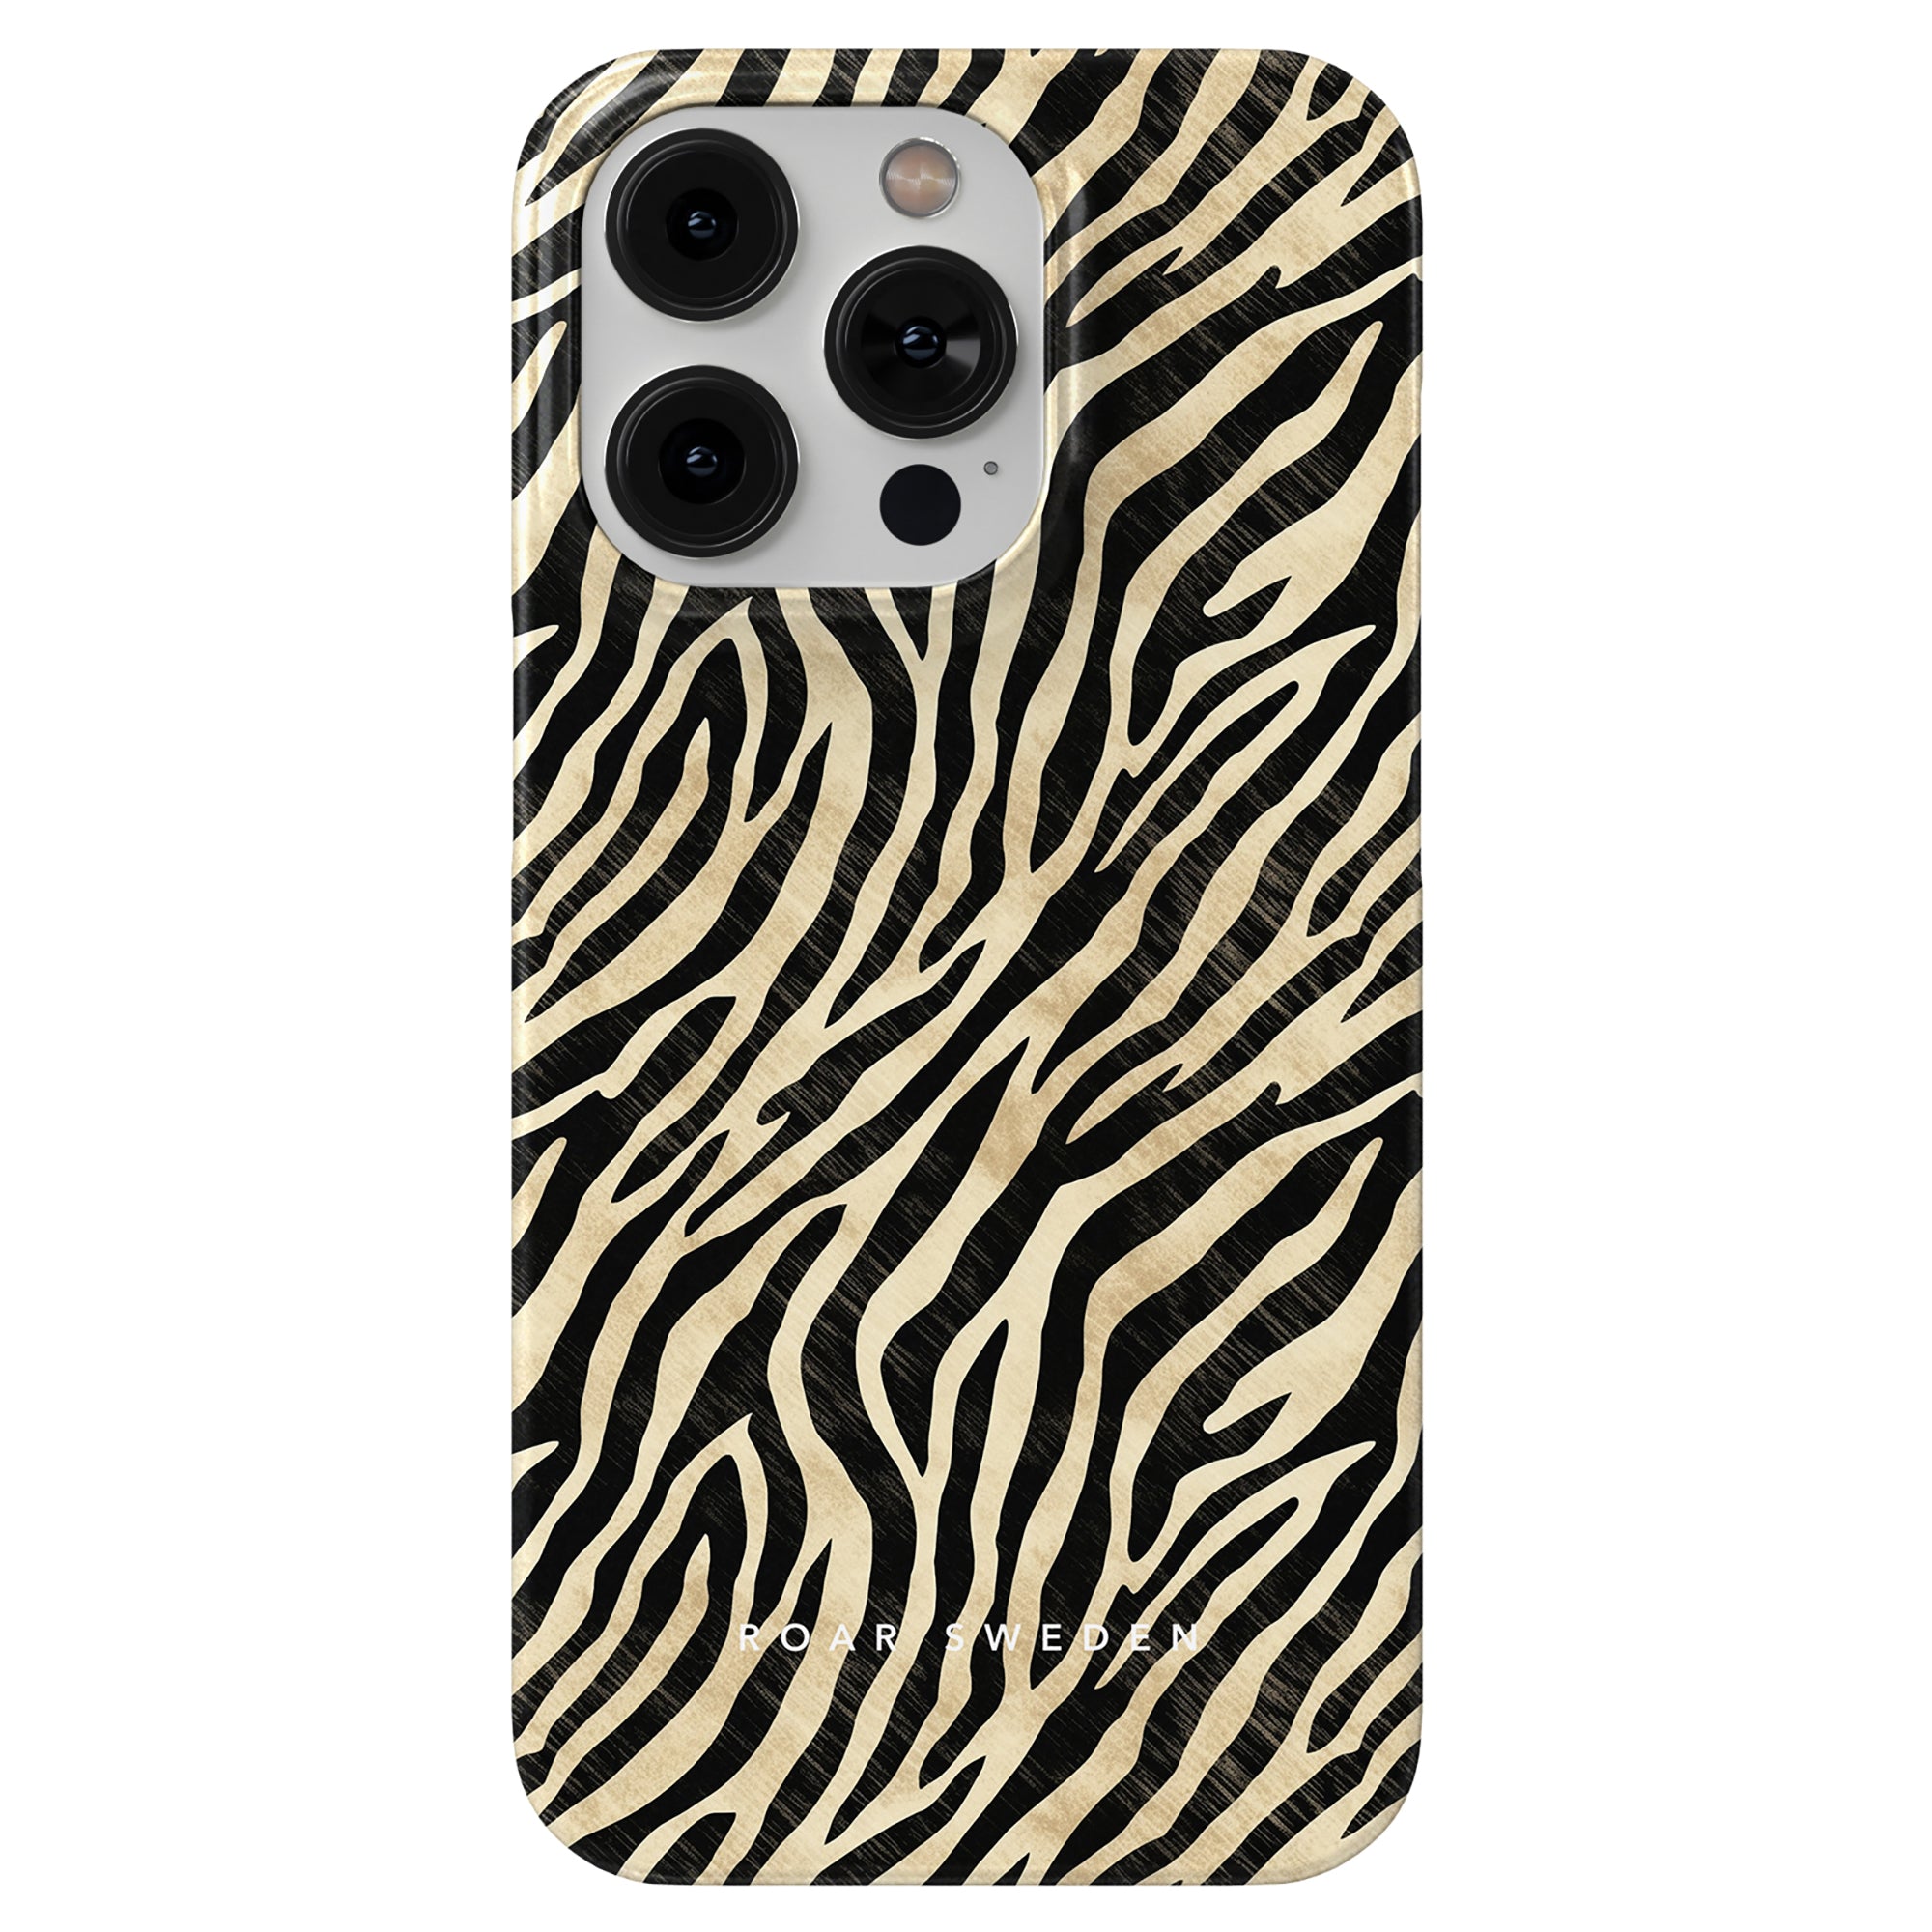 A smartphone with a Marty - Slim case from the Zebra Collection featuring three rear cameras and a flash. The brand name, "Nordgreen," is visible on the lower part of the case, enhancing its sleek design.